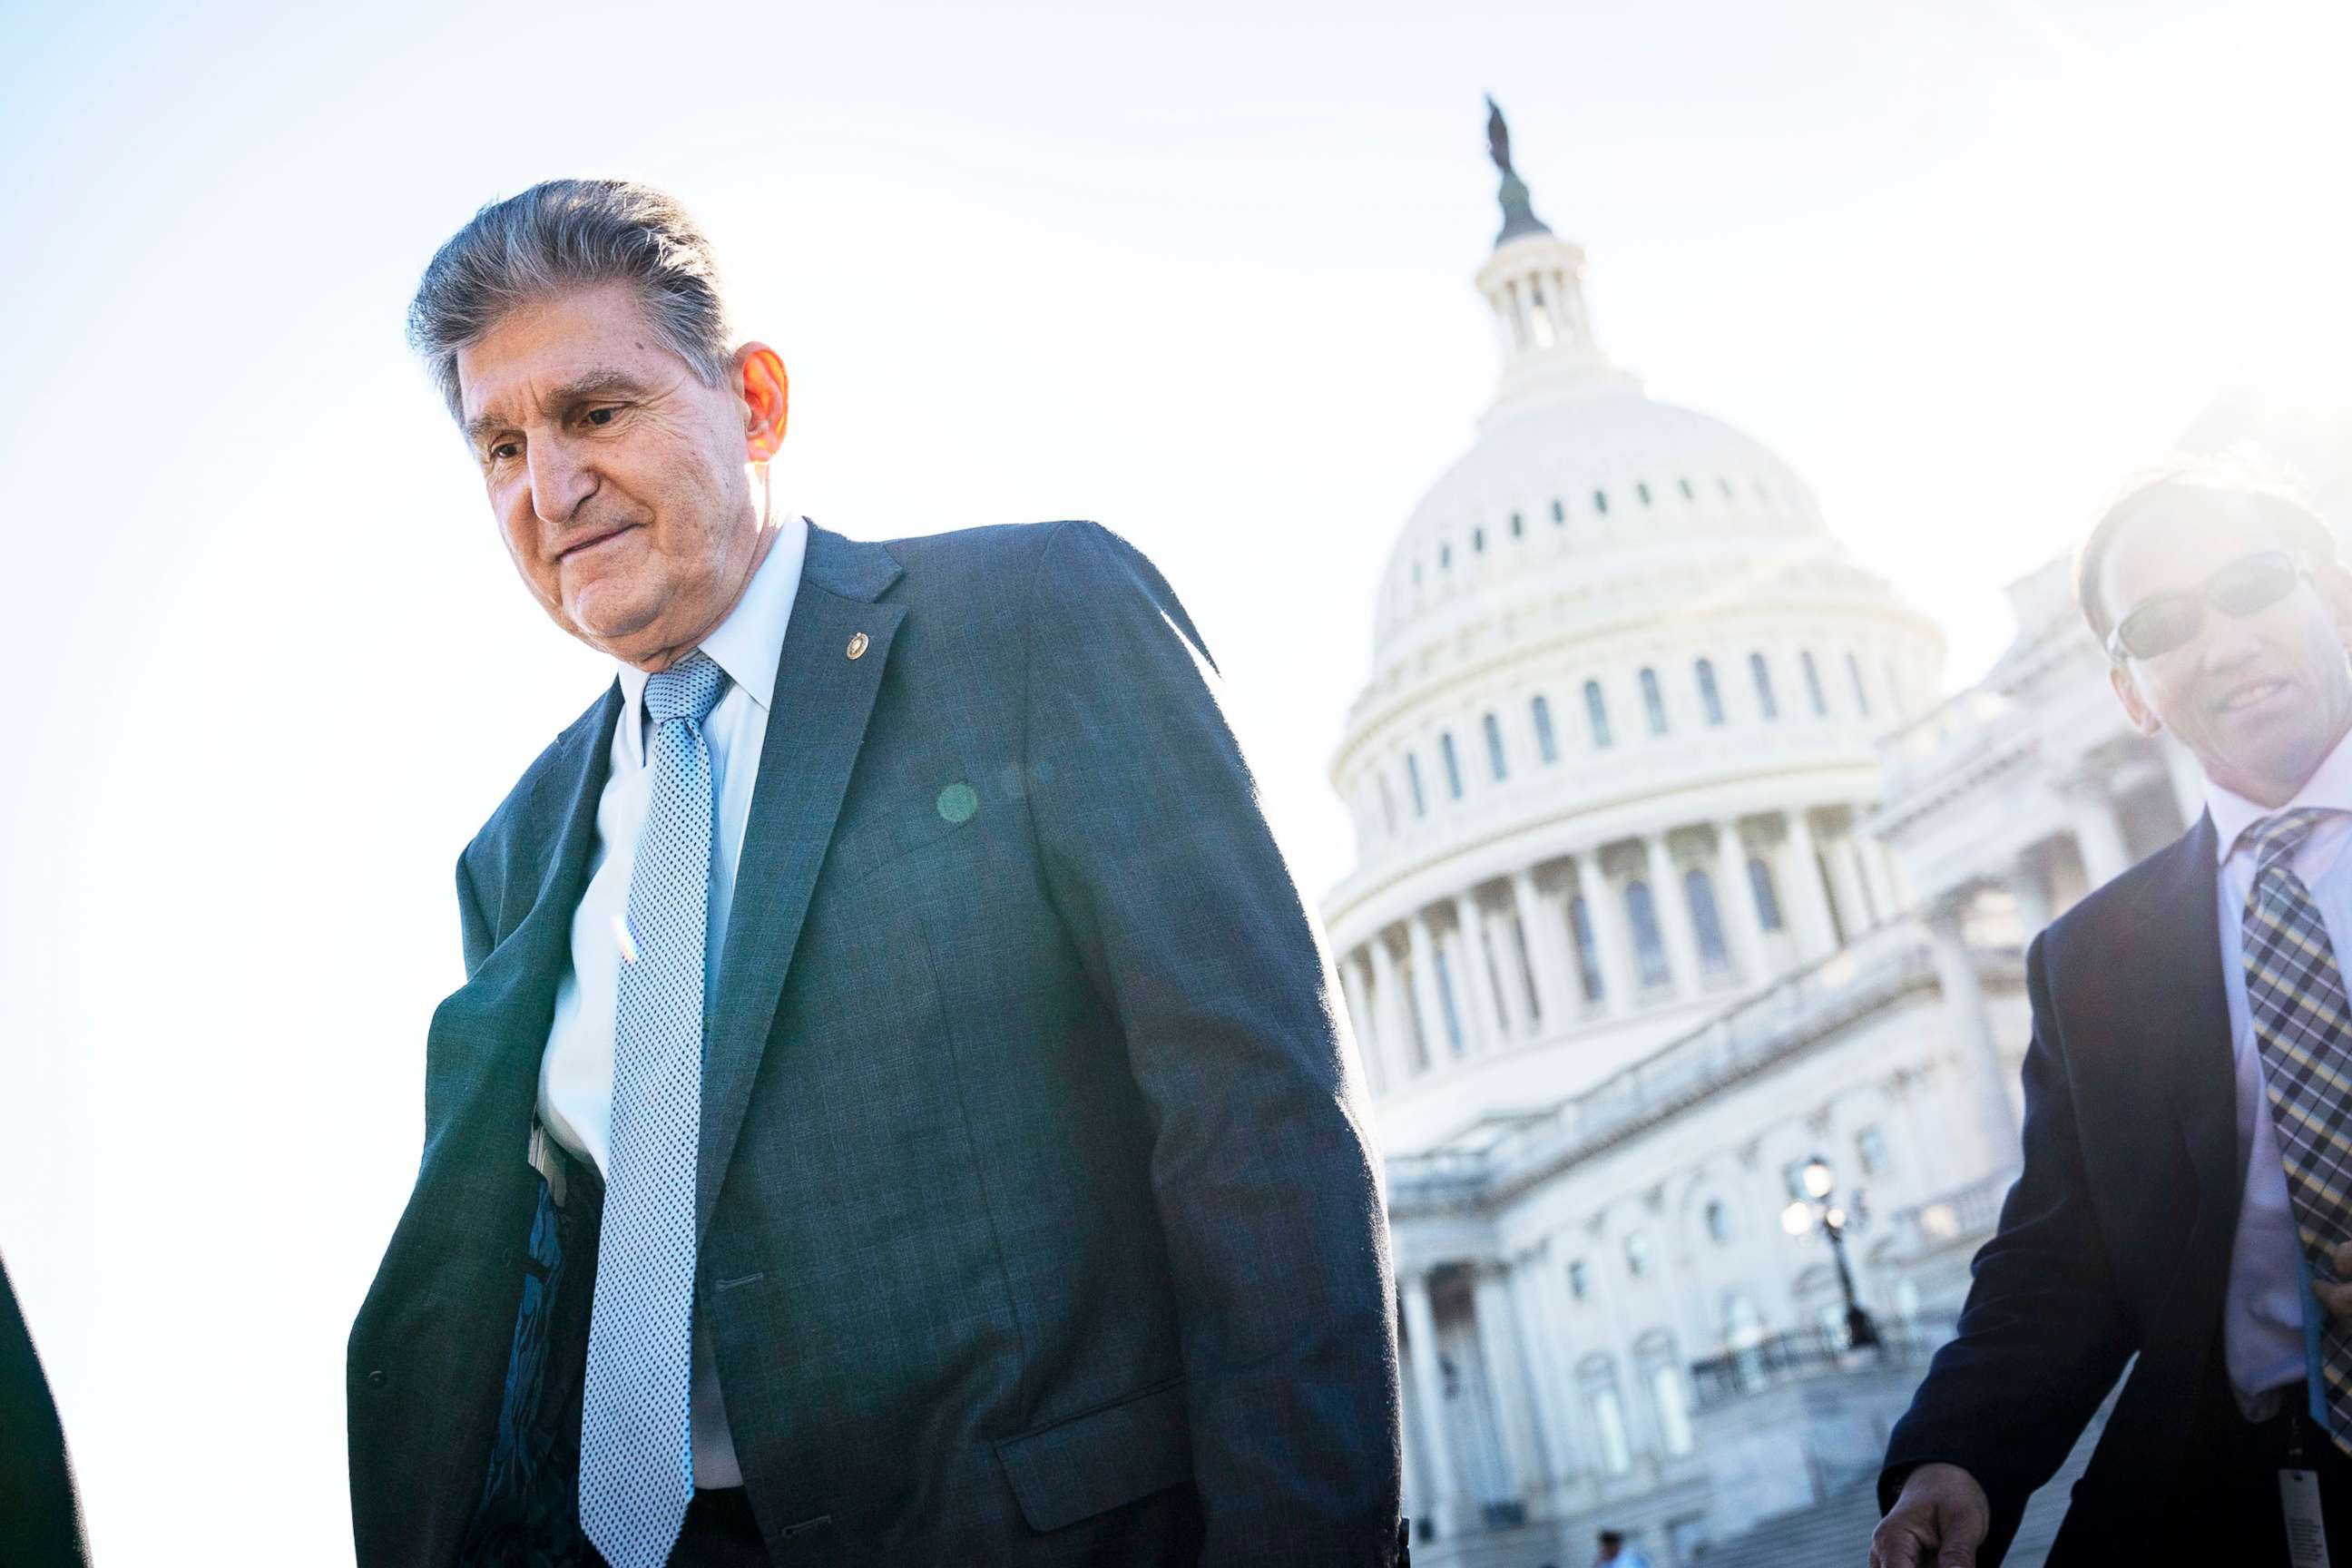 PHOTO: Sen. Joe Manchin leaves the Capitol after a vote Oct. 27, 2021.